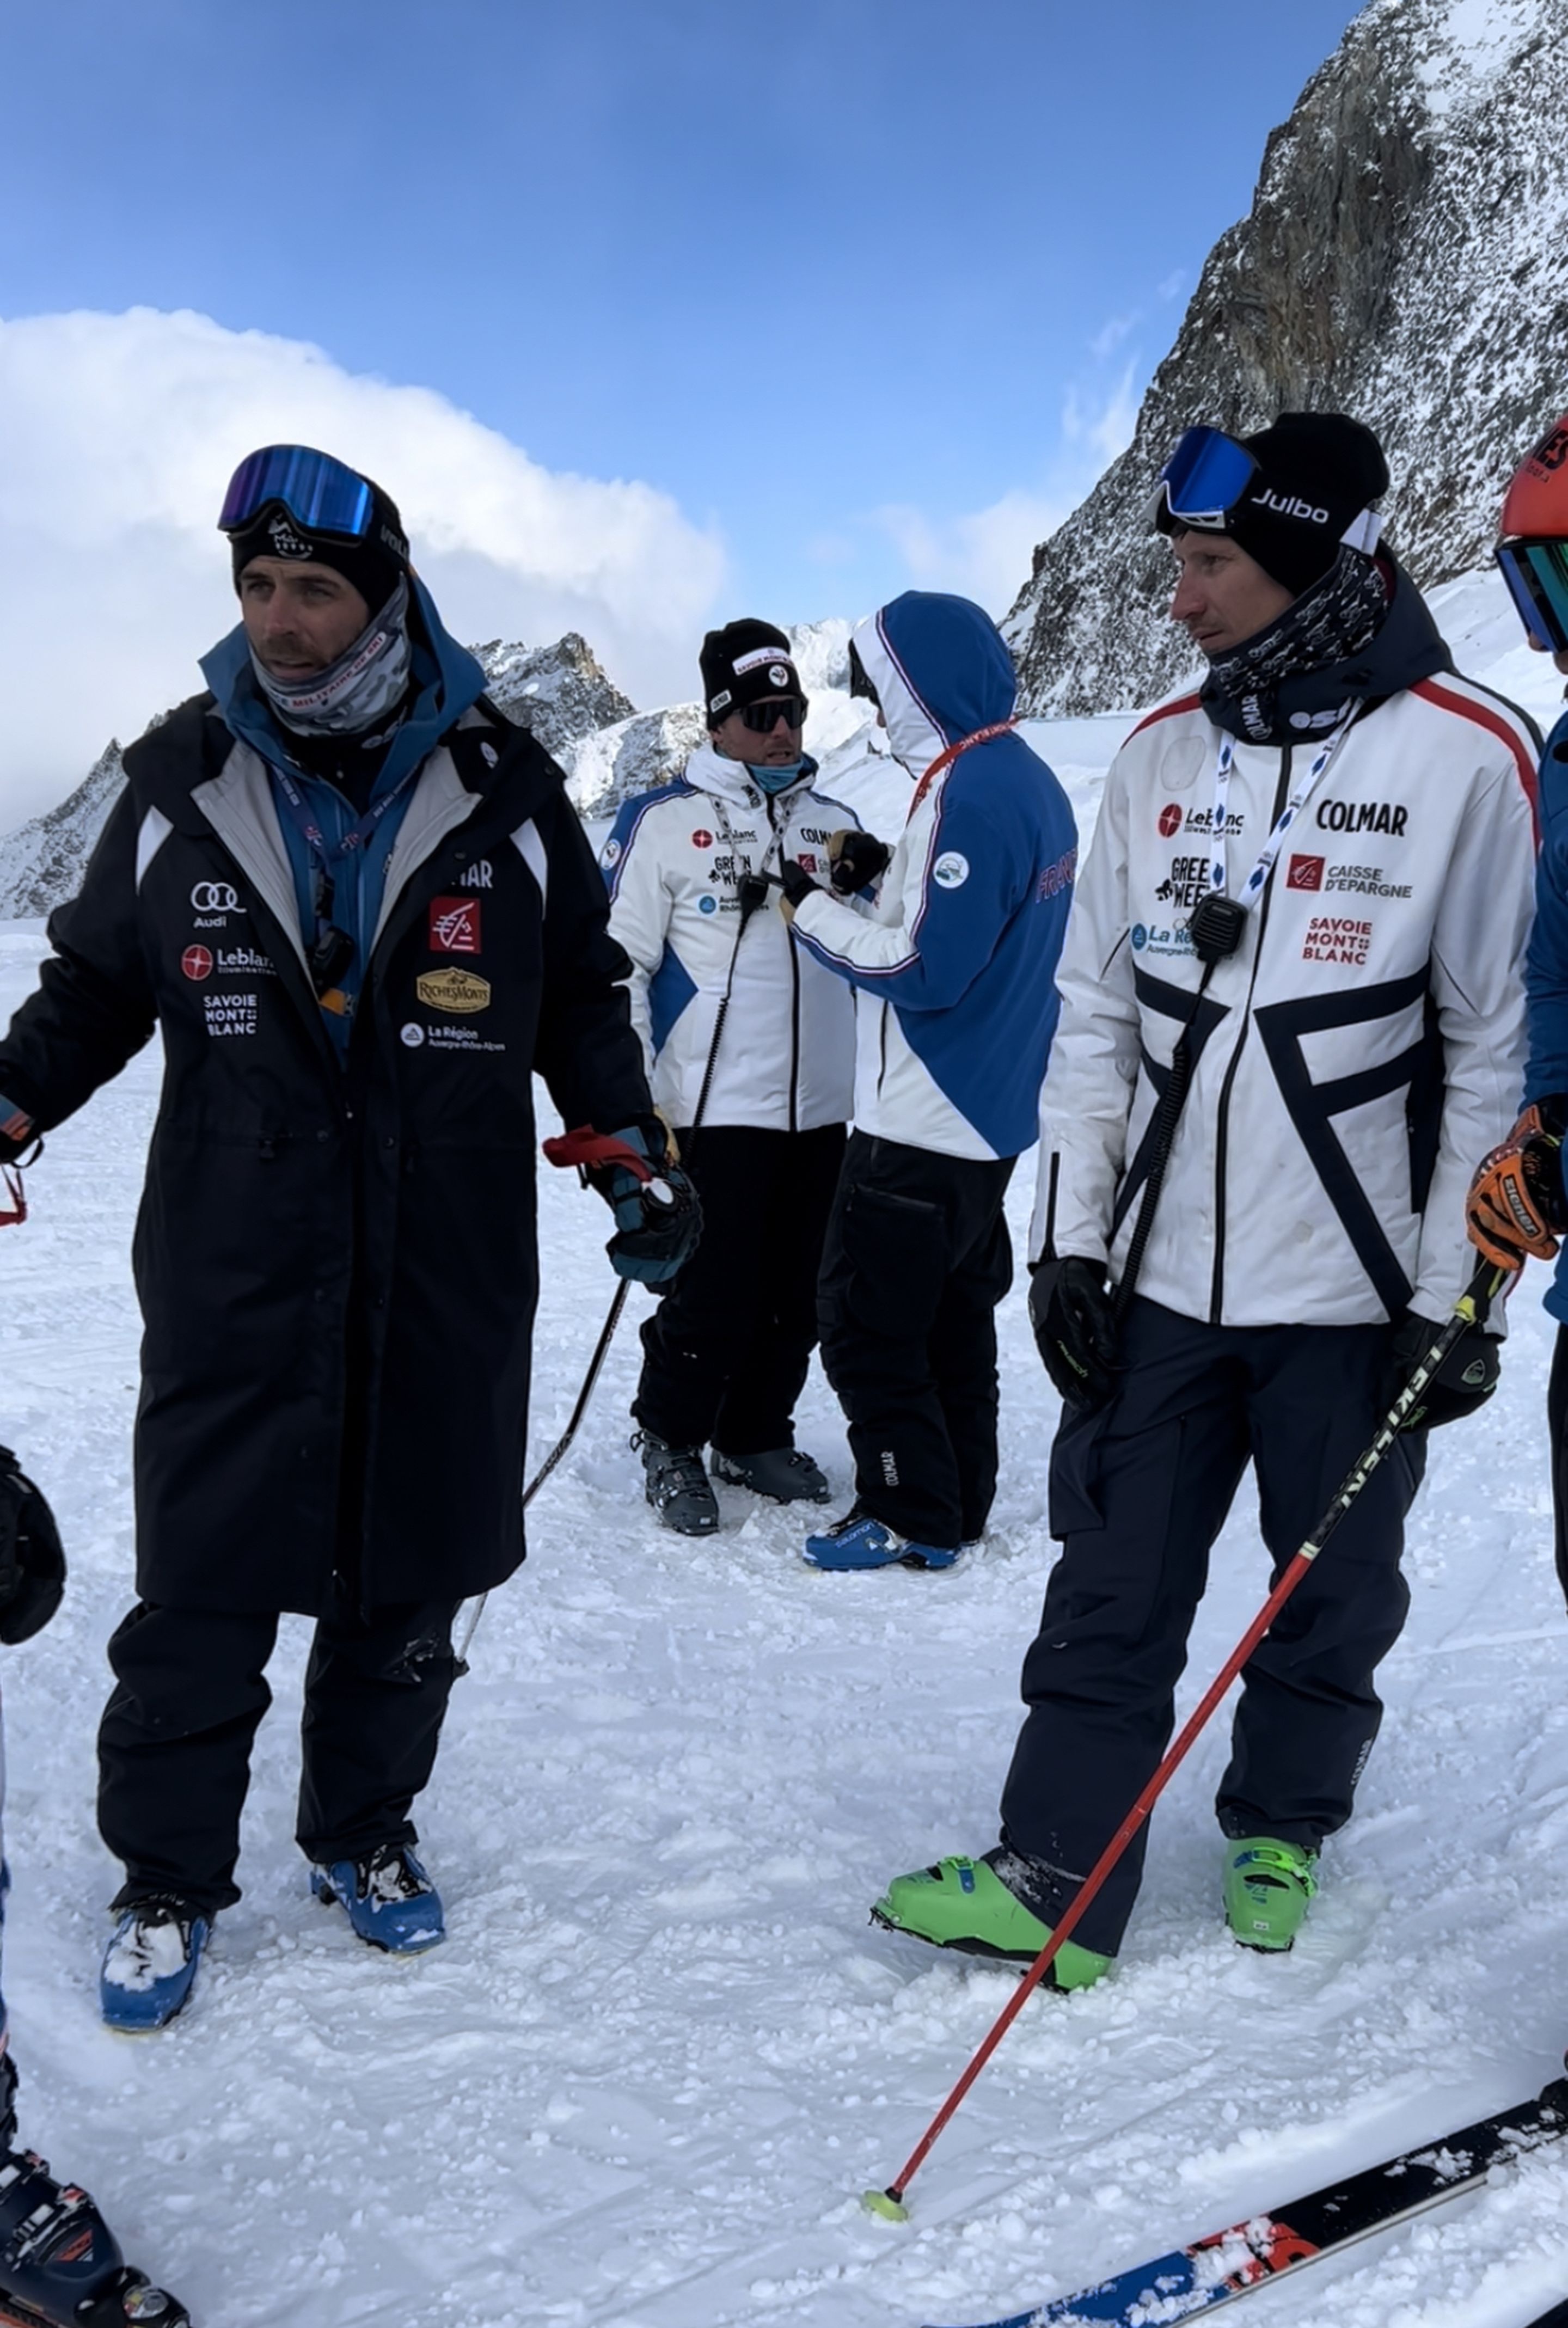 Bastien (Vice World Champion) and Jonathan Midol (Olympic Bronze Medalist), seen coaching in Saas Fee.